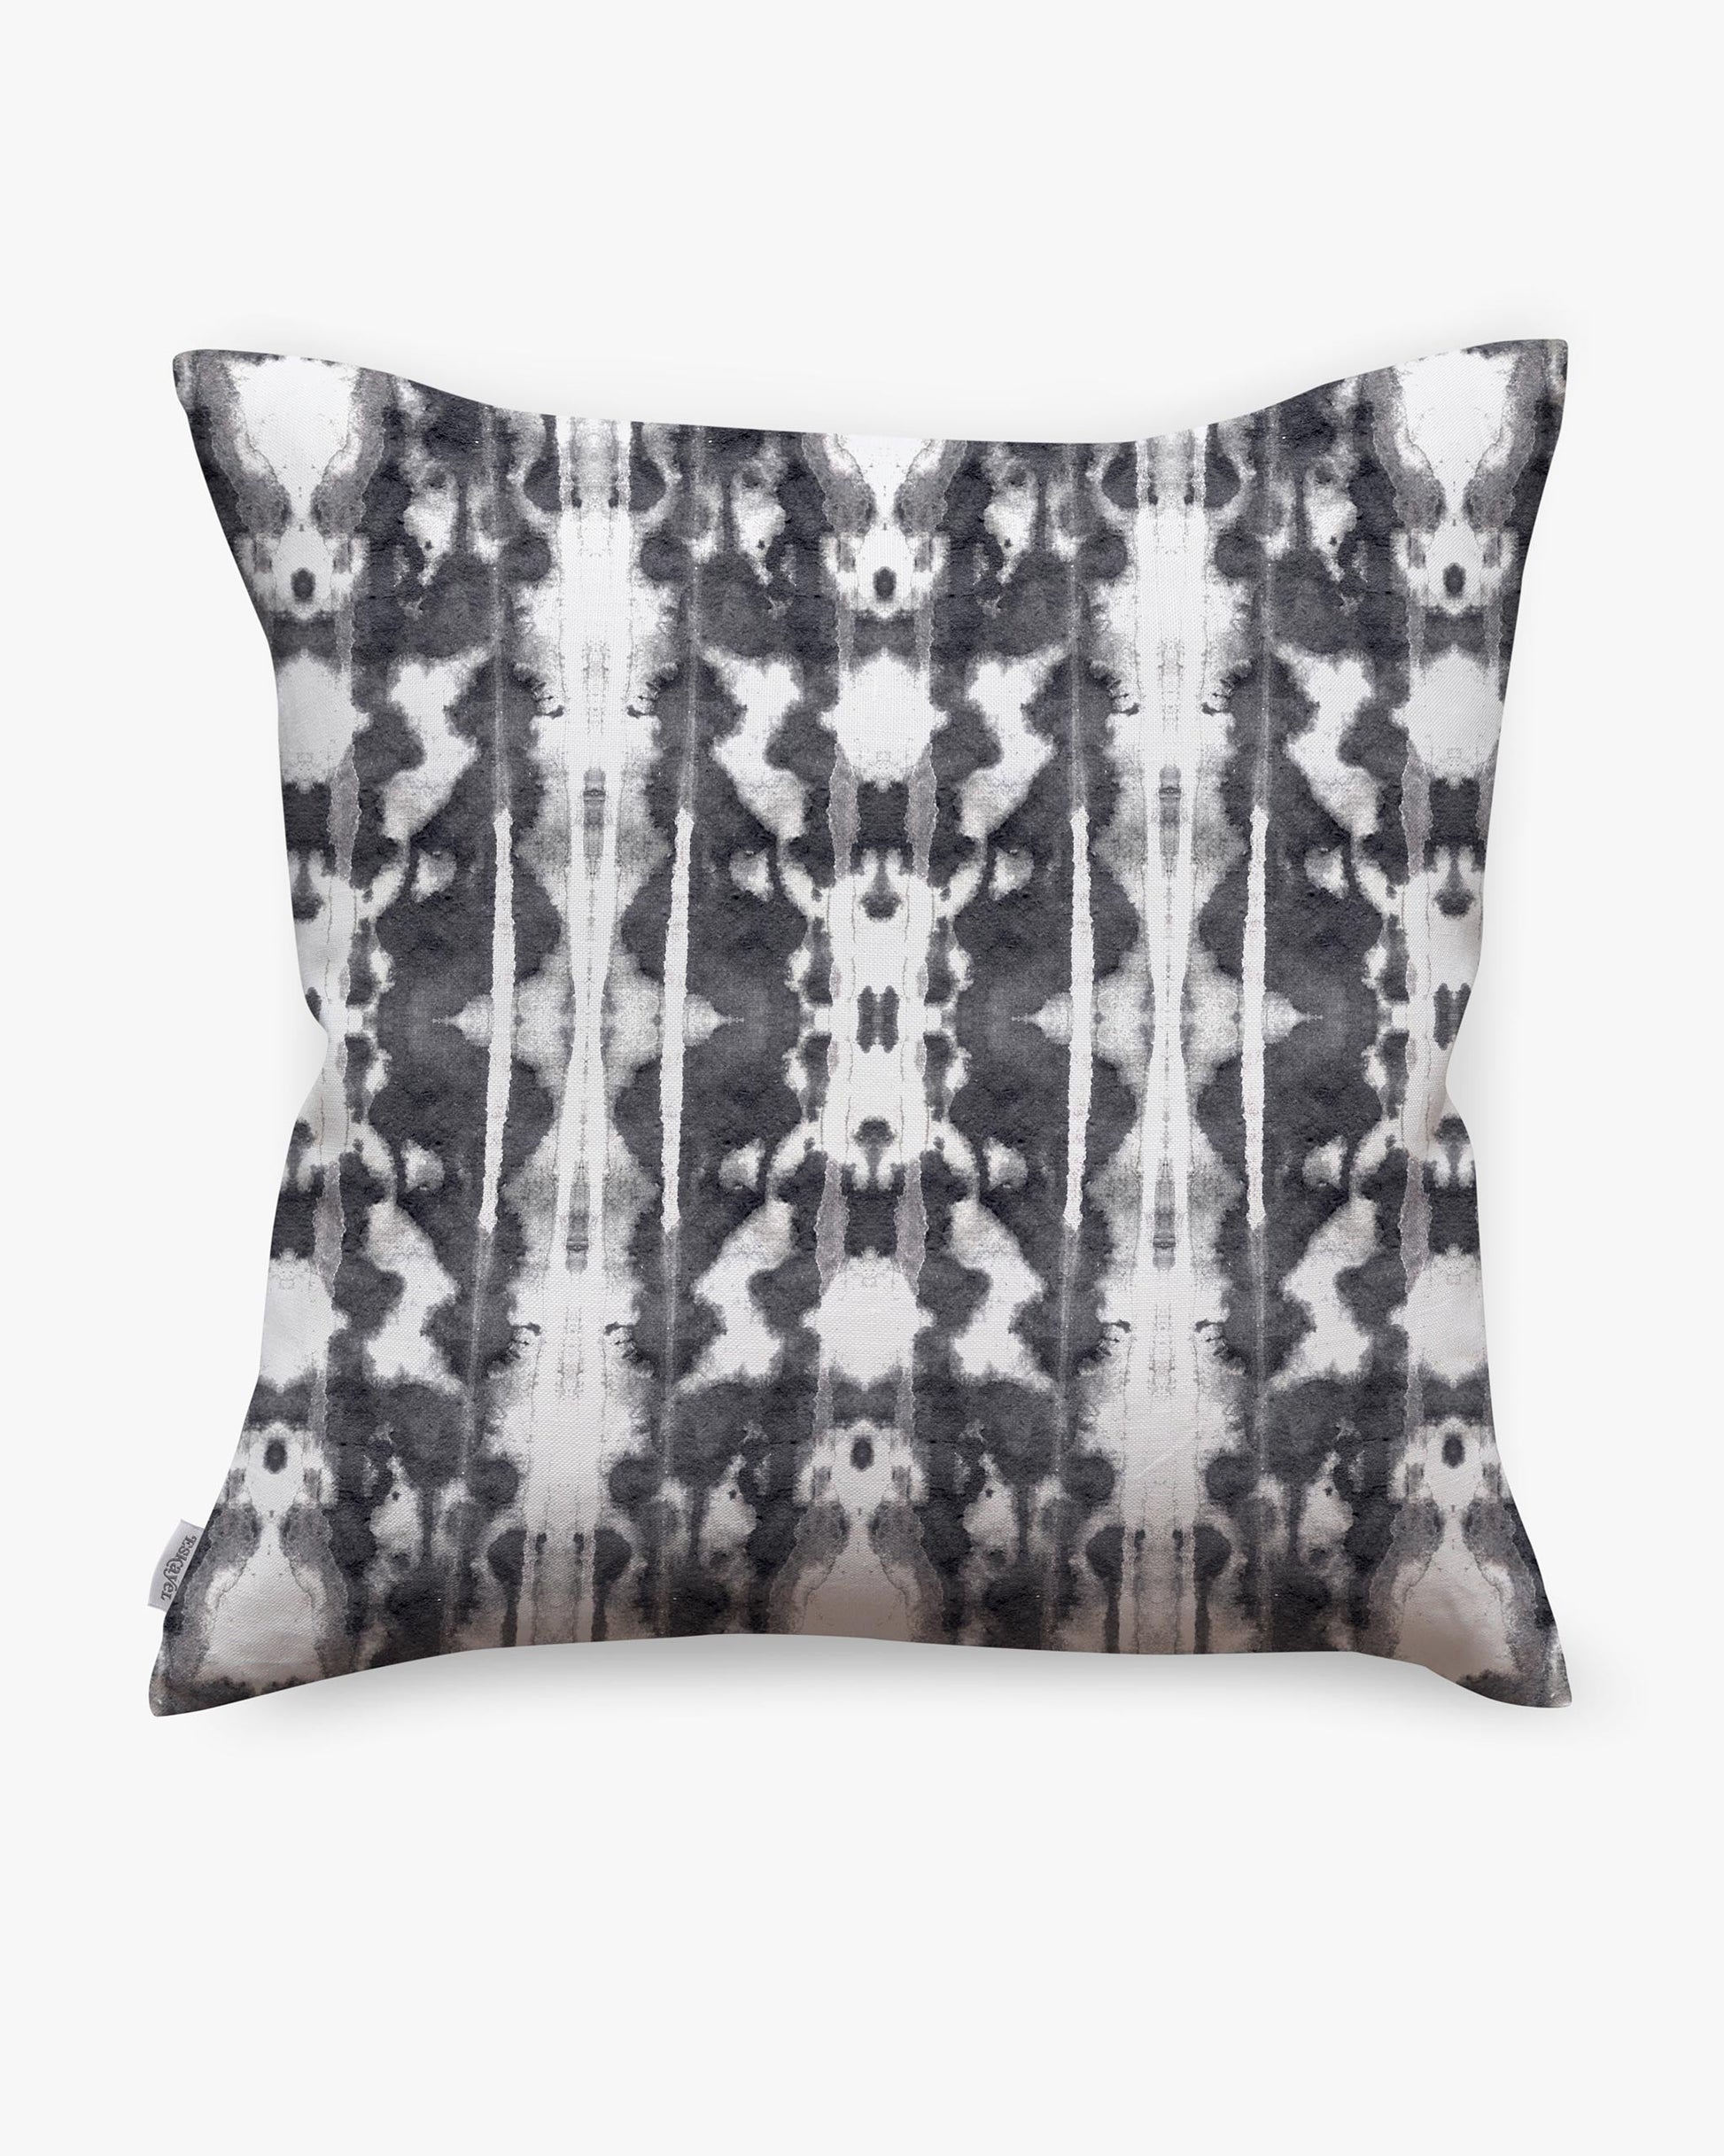 A Biami Pillow Black with a Biami pattern, made from high-end fabric